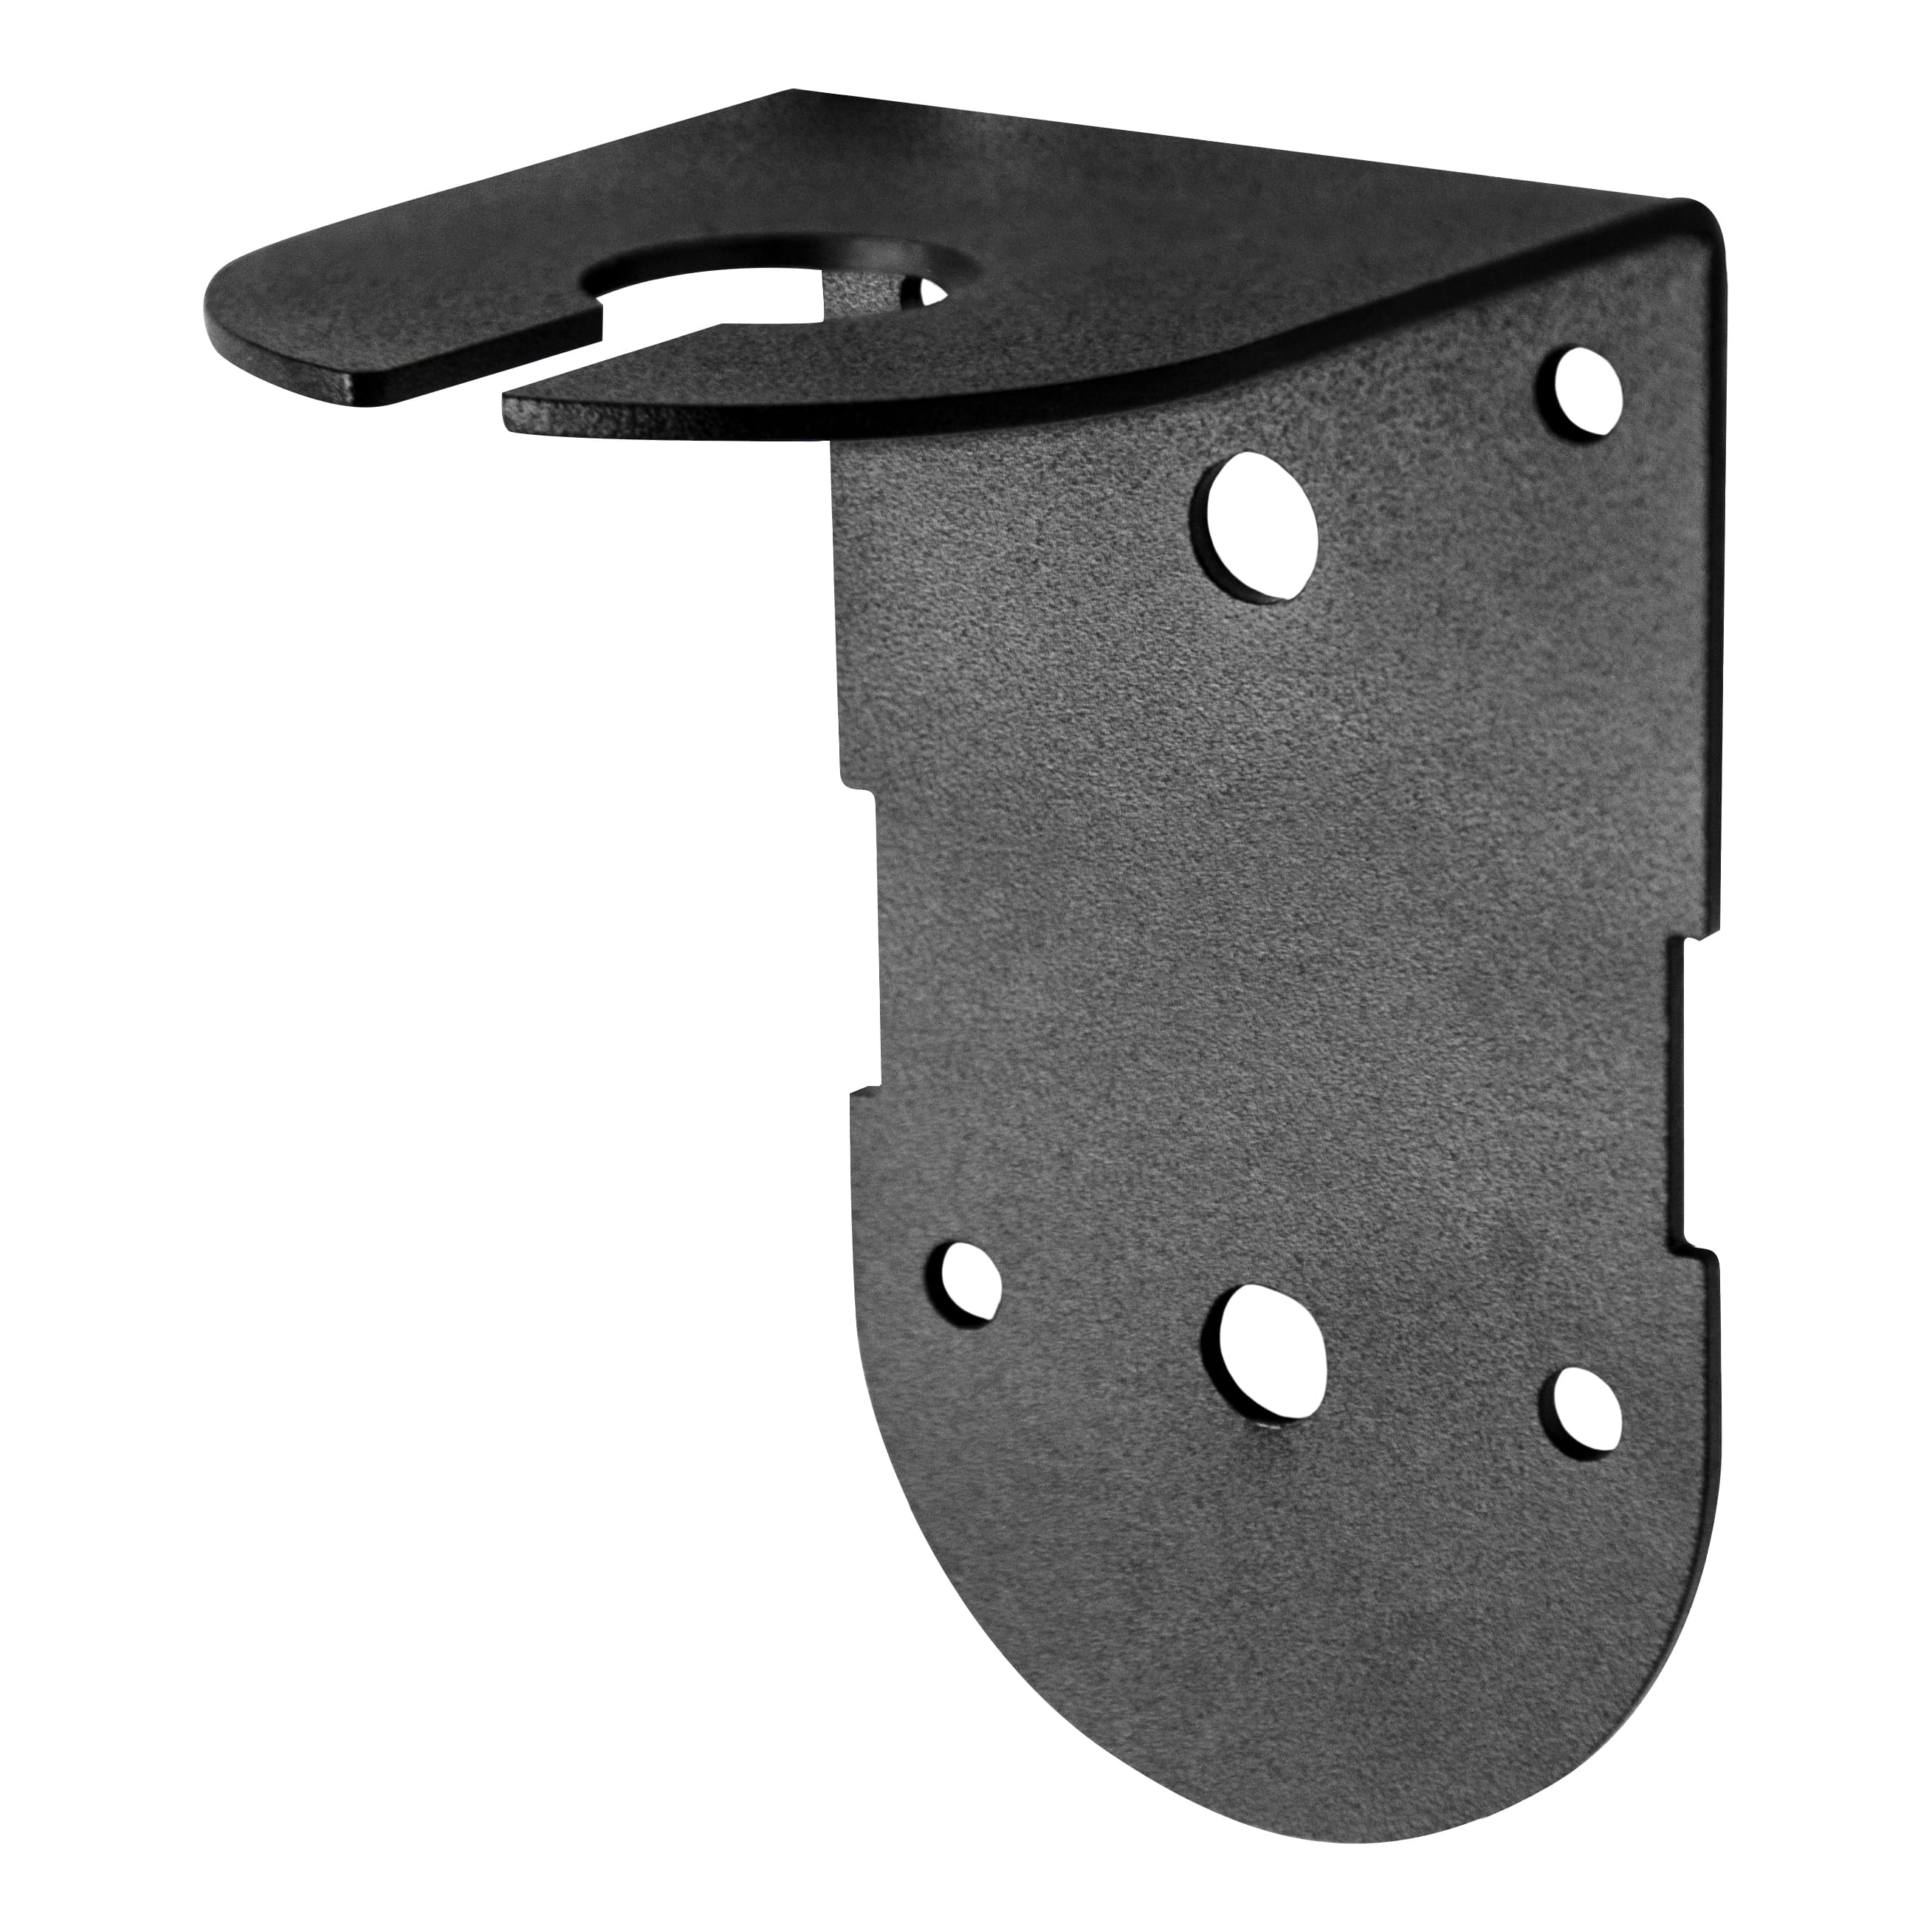 SPYPOINT® Cellular Trail Camera Booster - Bracket View